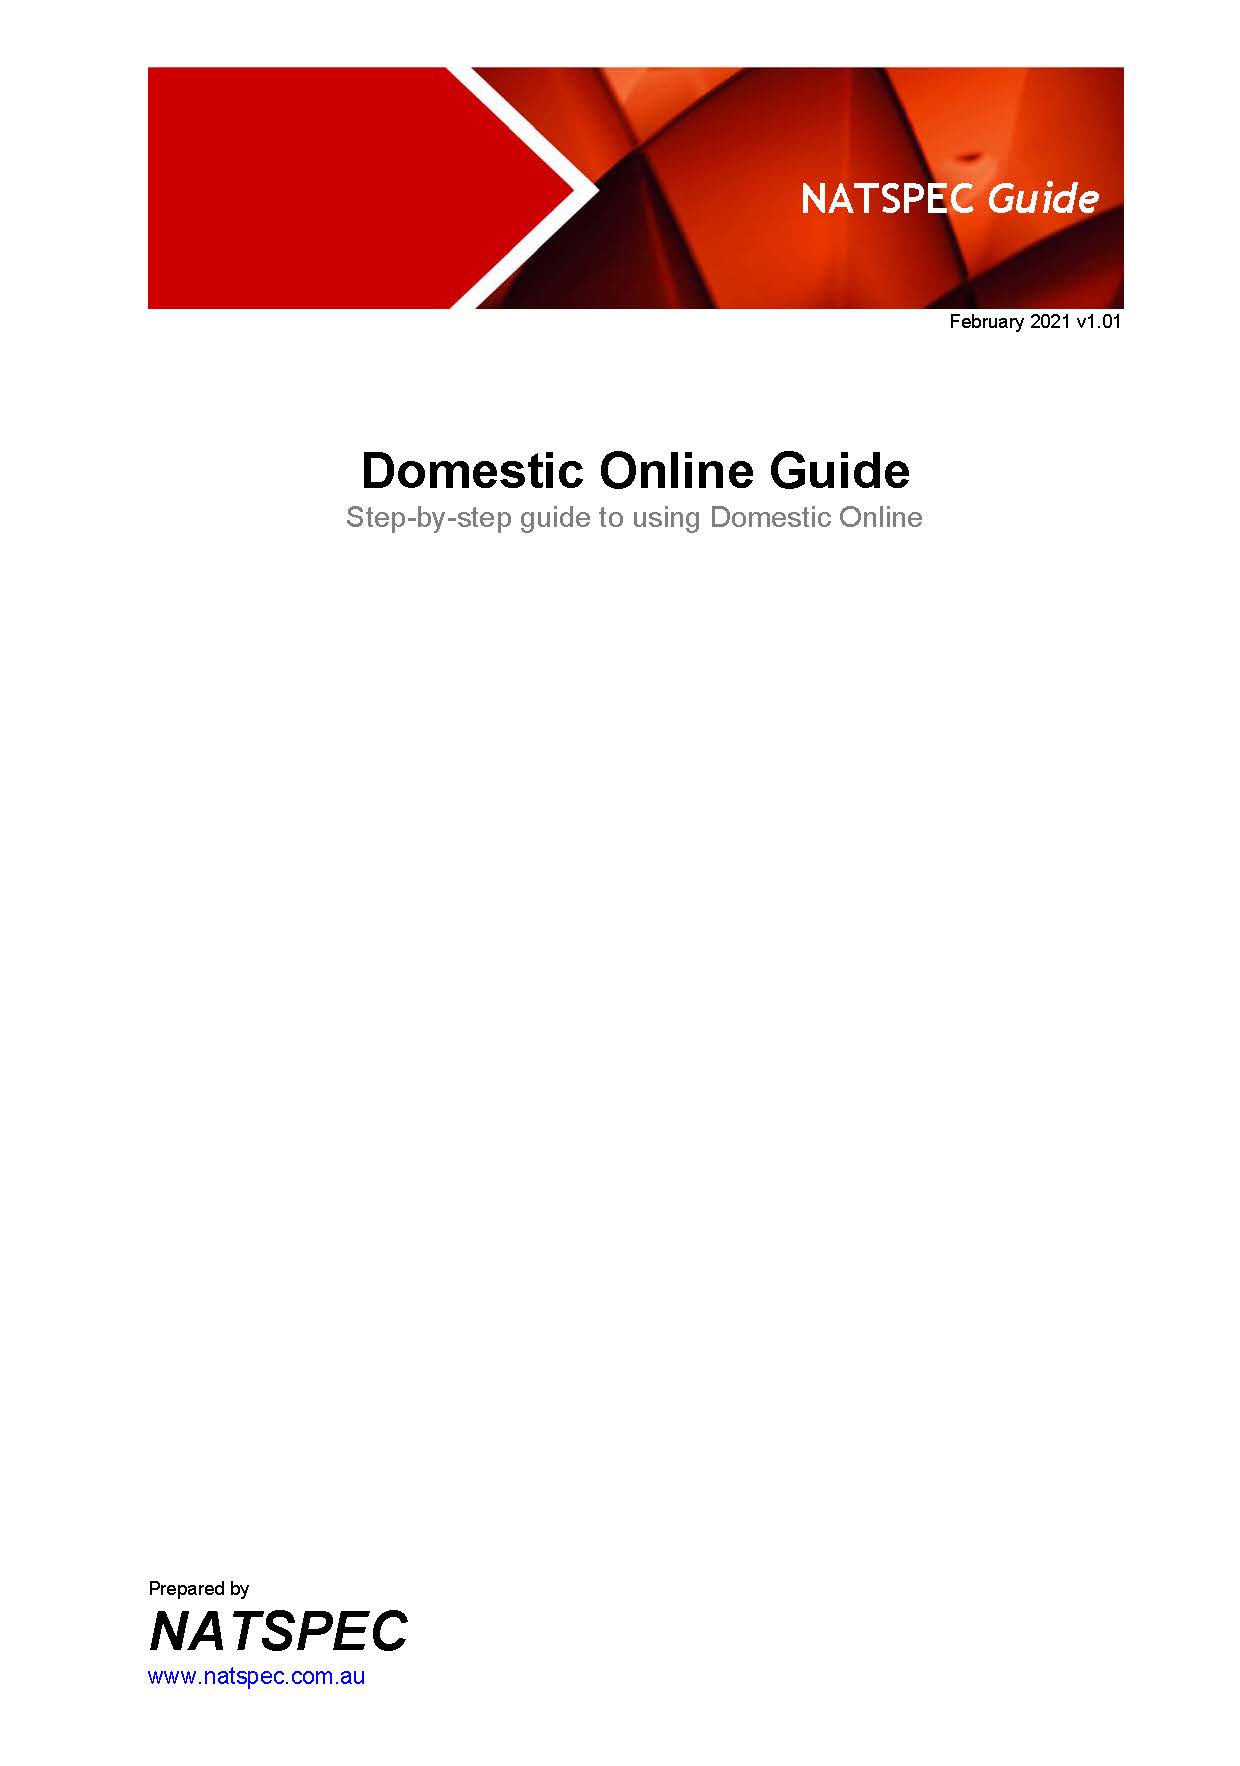 Domestic Online Guide